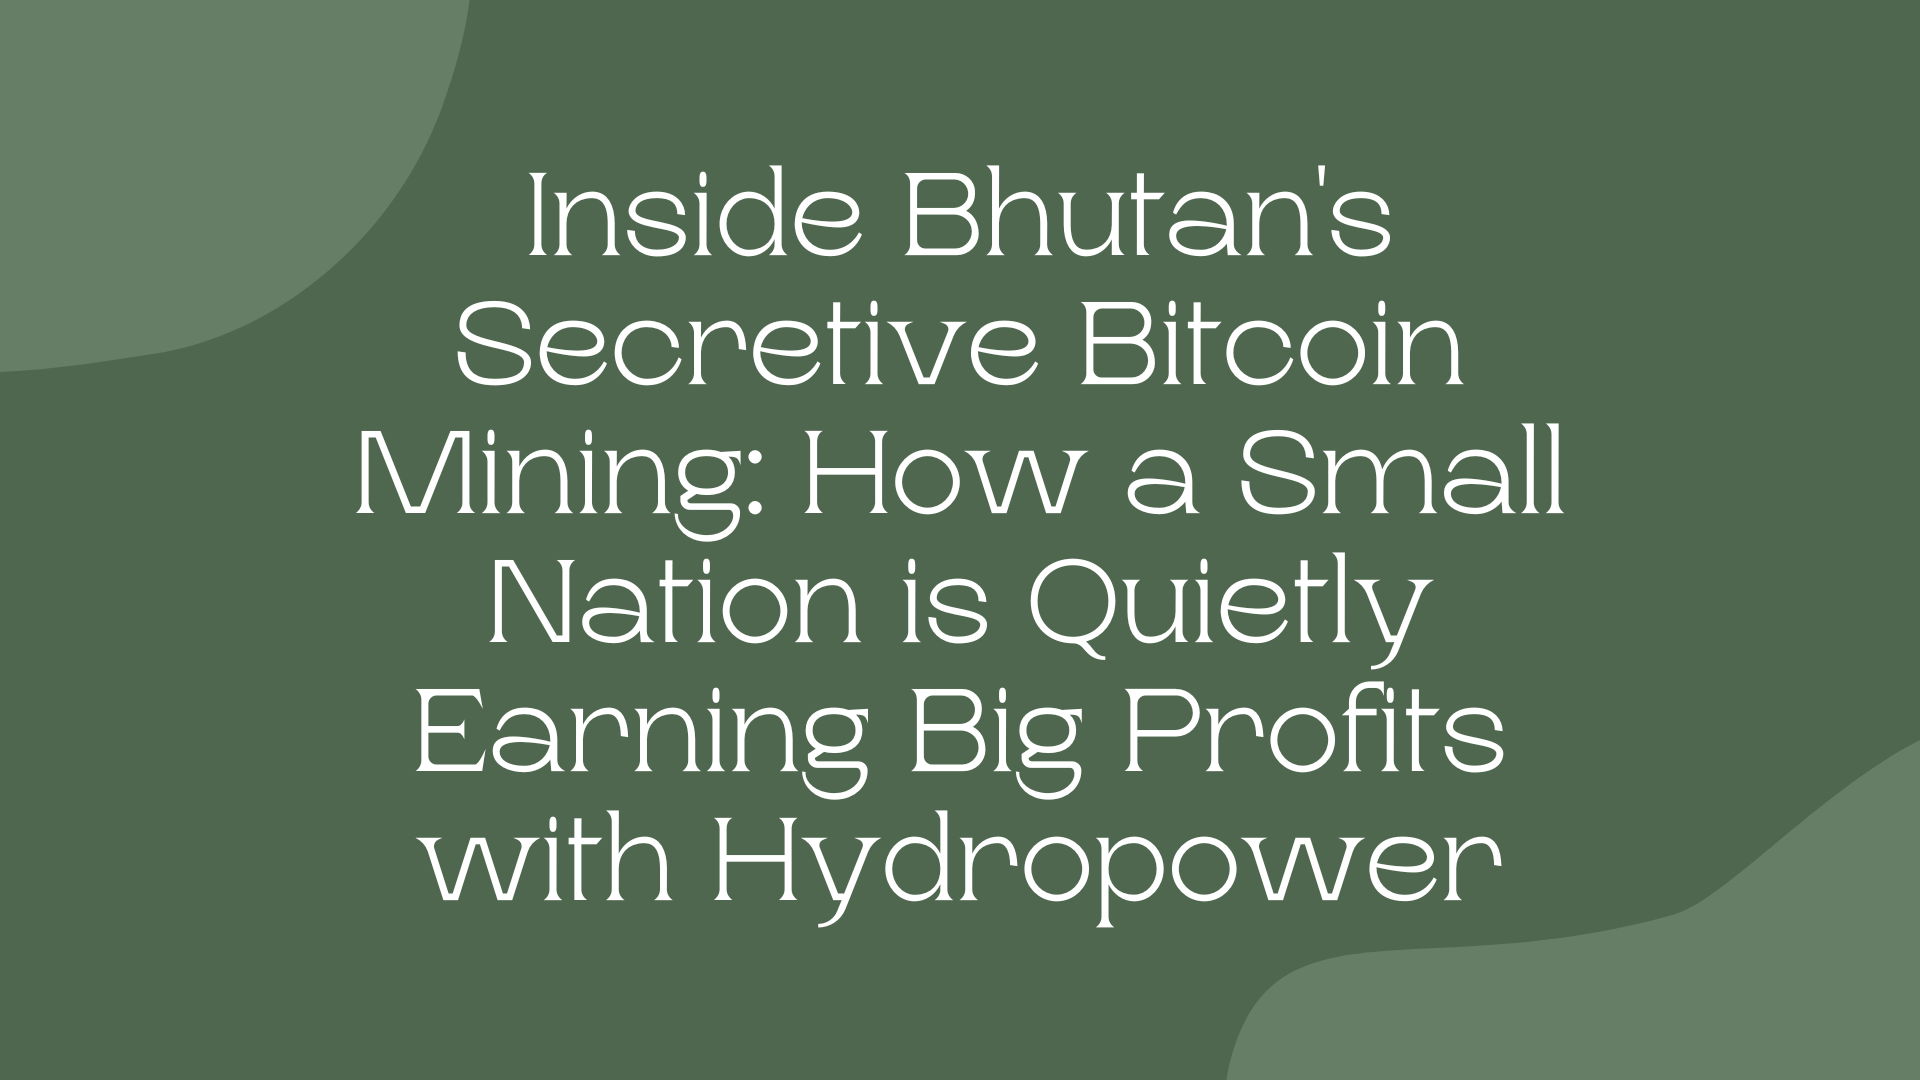 Inside Bhutan's Secretive Bitcoin Mining: How a Small Nation is Quietly Earning Big Profits with Hydropower